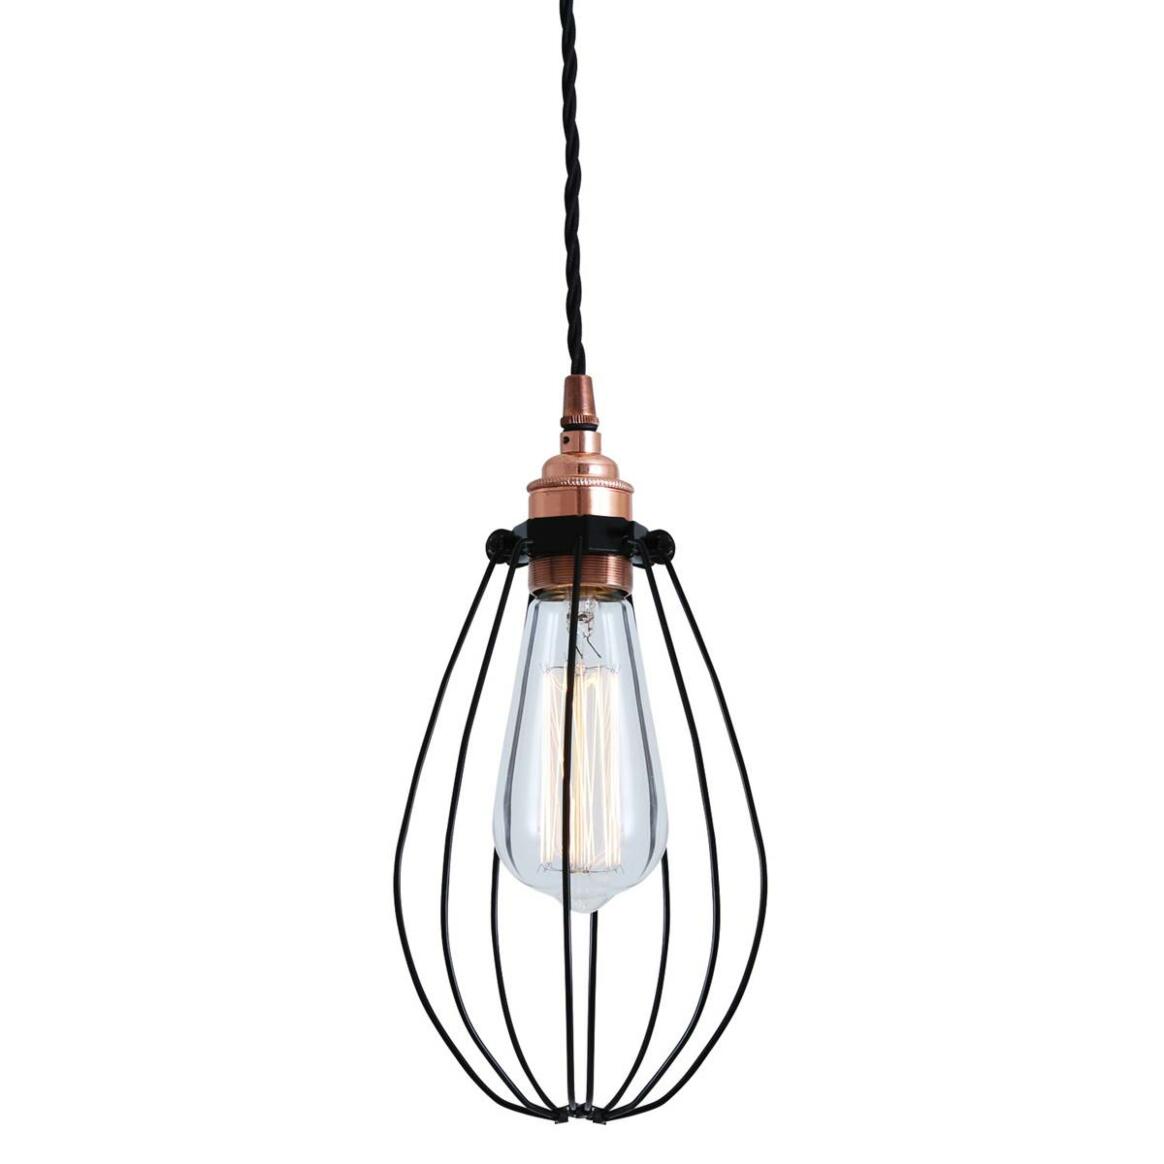 Abuja Industrial Cage Copper Pendant Light main product image